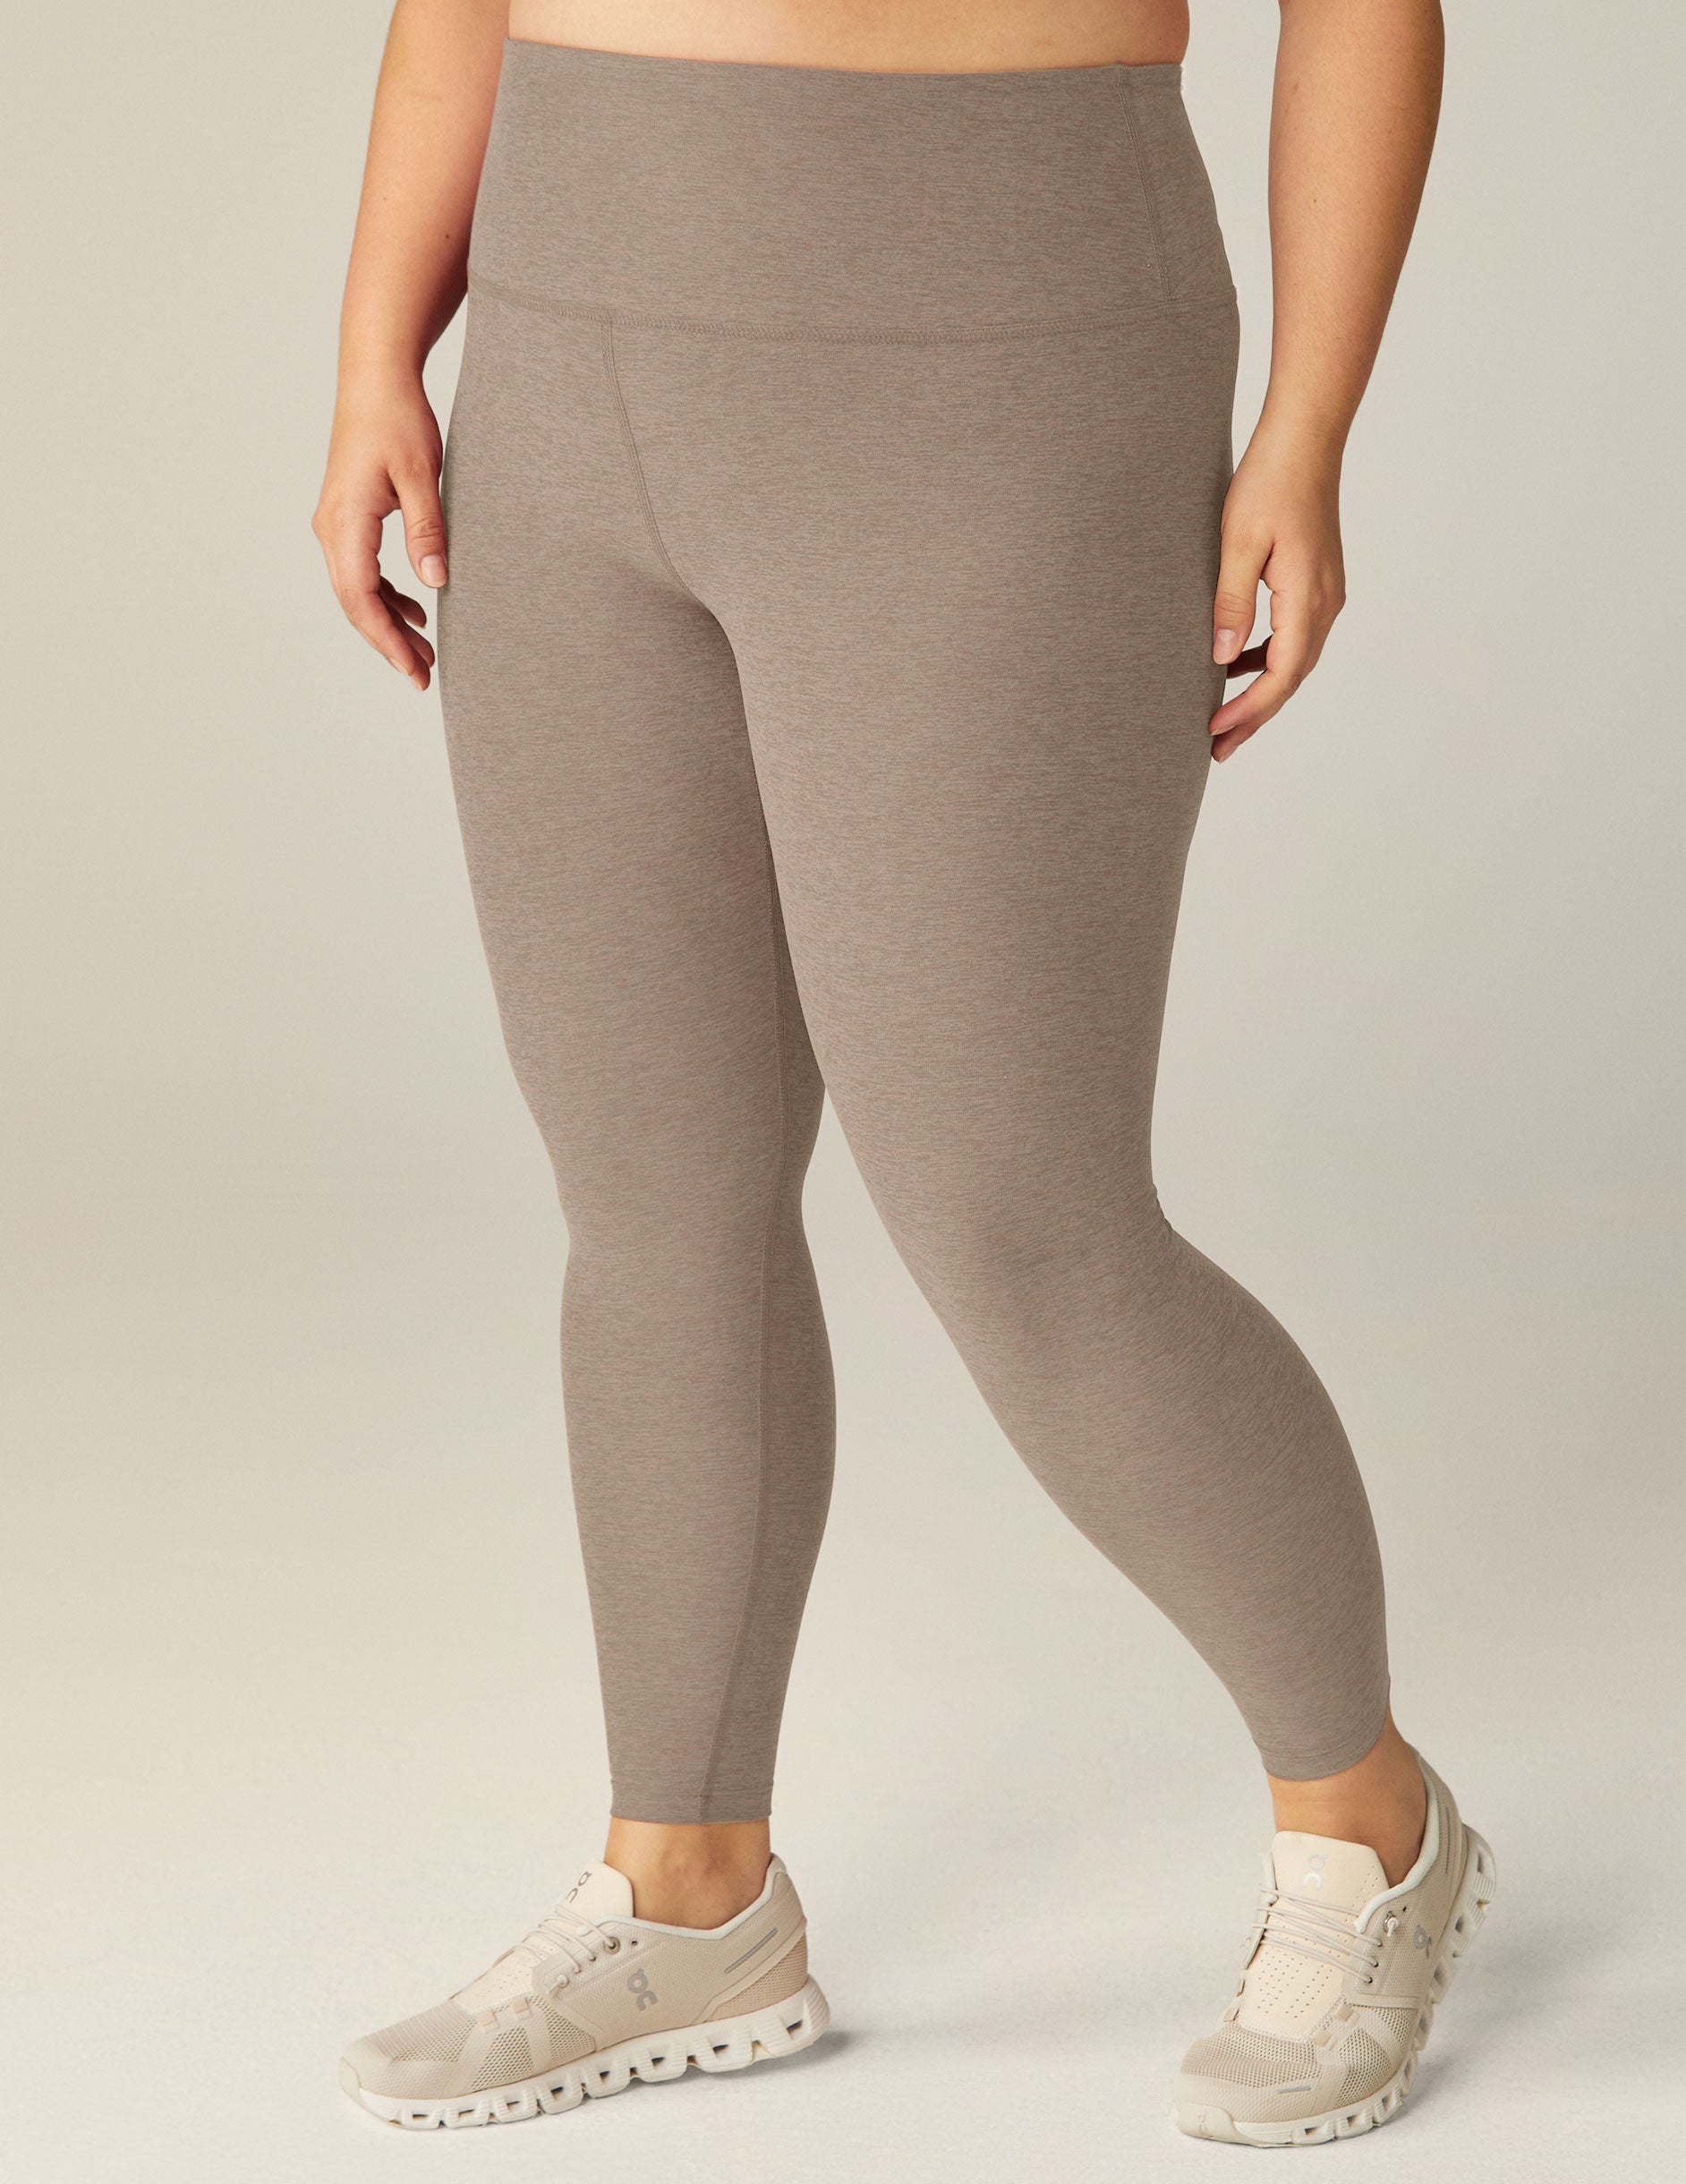 Beyond Yoga Spiced Cider Ombre High Rise Spacedye Leggings Size